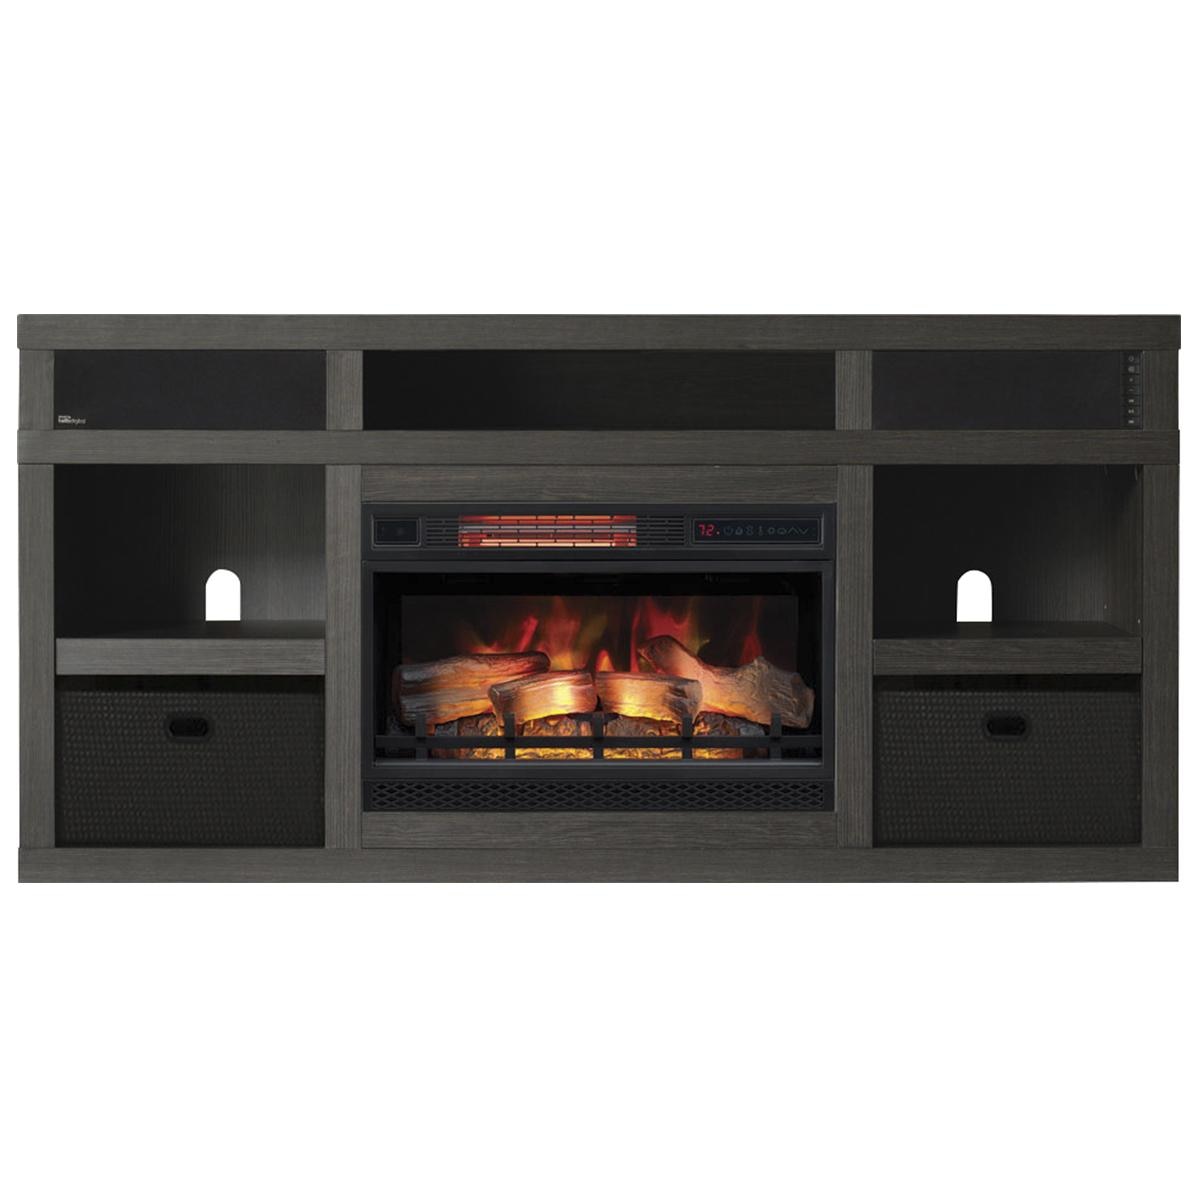 Contemporary Fireplace Screens Lovely Fabio Flames Greatlin 3 Piece Fireplace Entertainment Wall